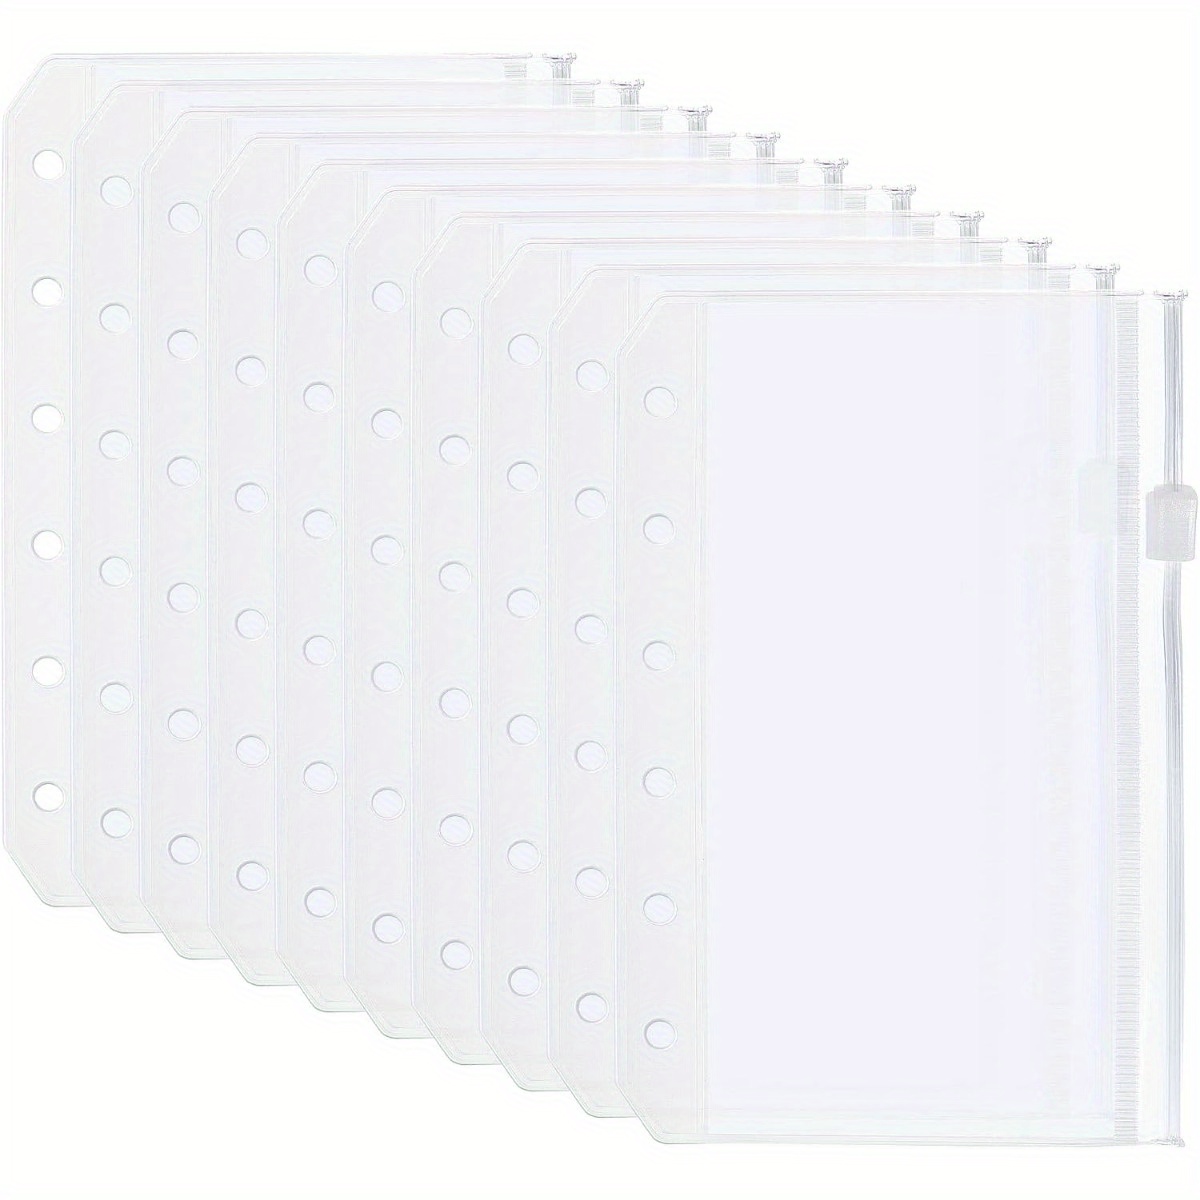 11 Hole Heavy Duty Photo Page Protector Plastic Clear Photo Album Sleeves  for 3-Ring Binder, 4 Pockets (3.5x5 Inch) Per Page - AliExpress